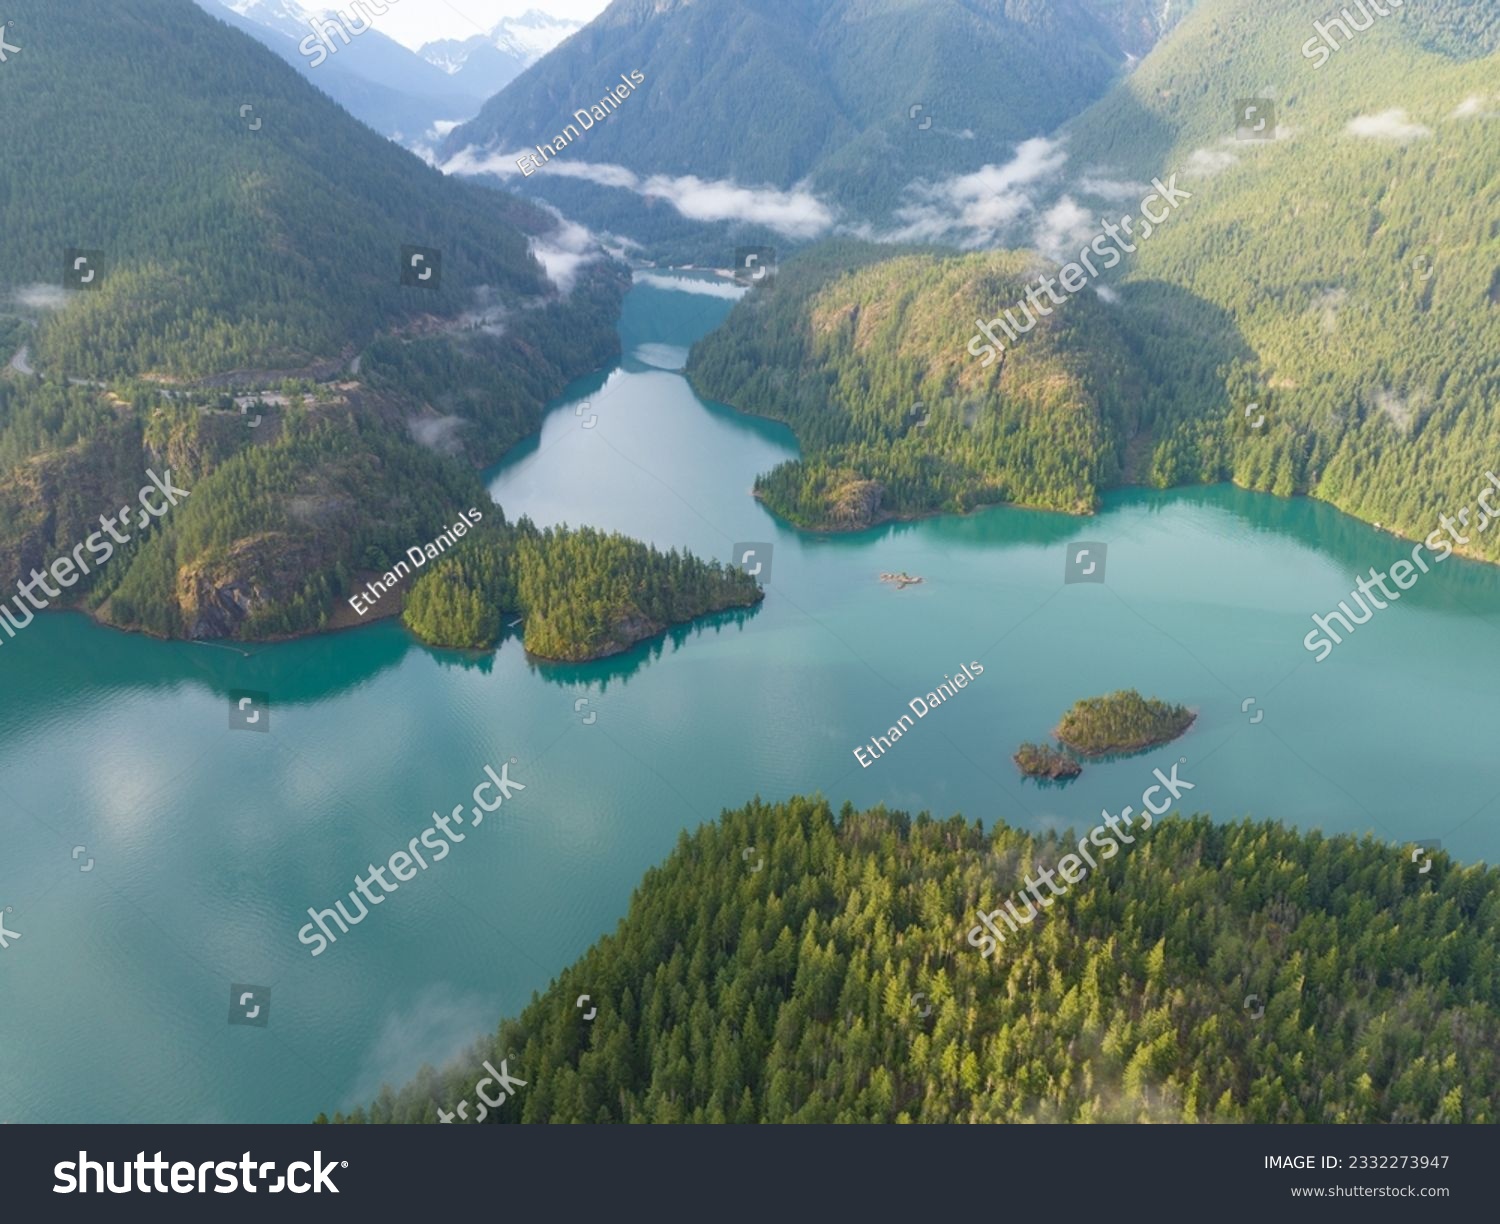 Rugged, forest-covered slopes surround Diablo Lake in North Cascades National Park. This mountainous region of northern Washington is absolutely beautiful and easily accessed during summer months. #2332273947